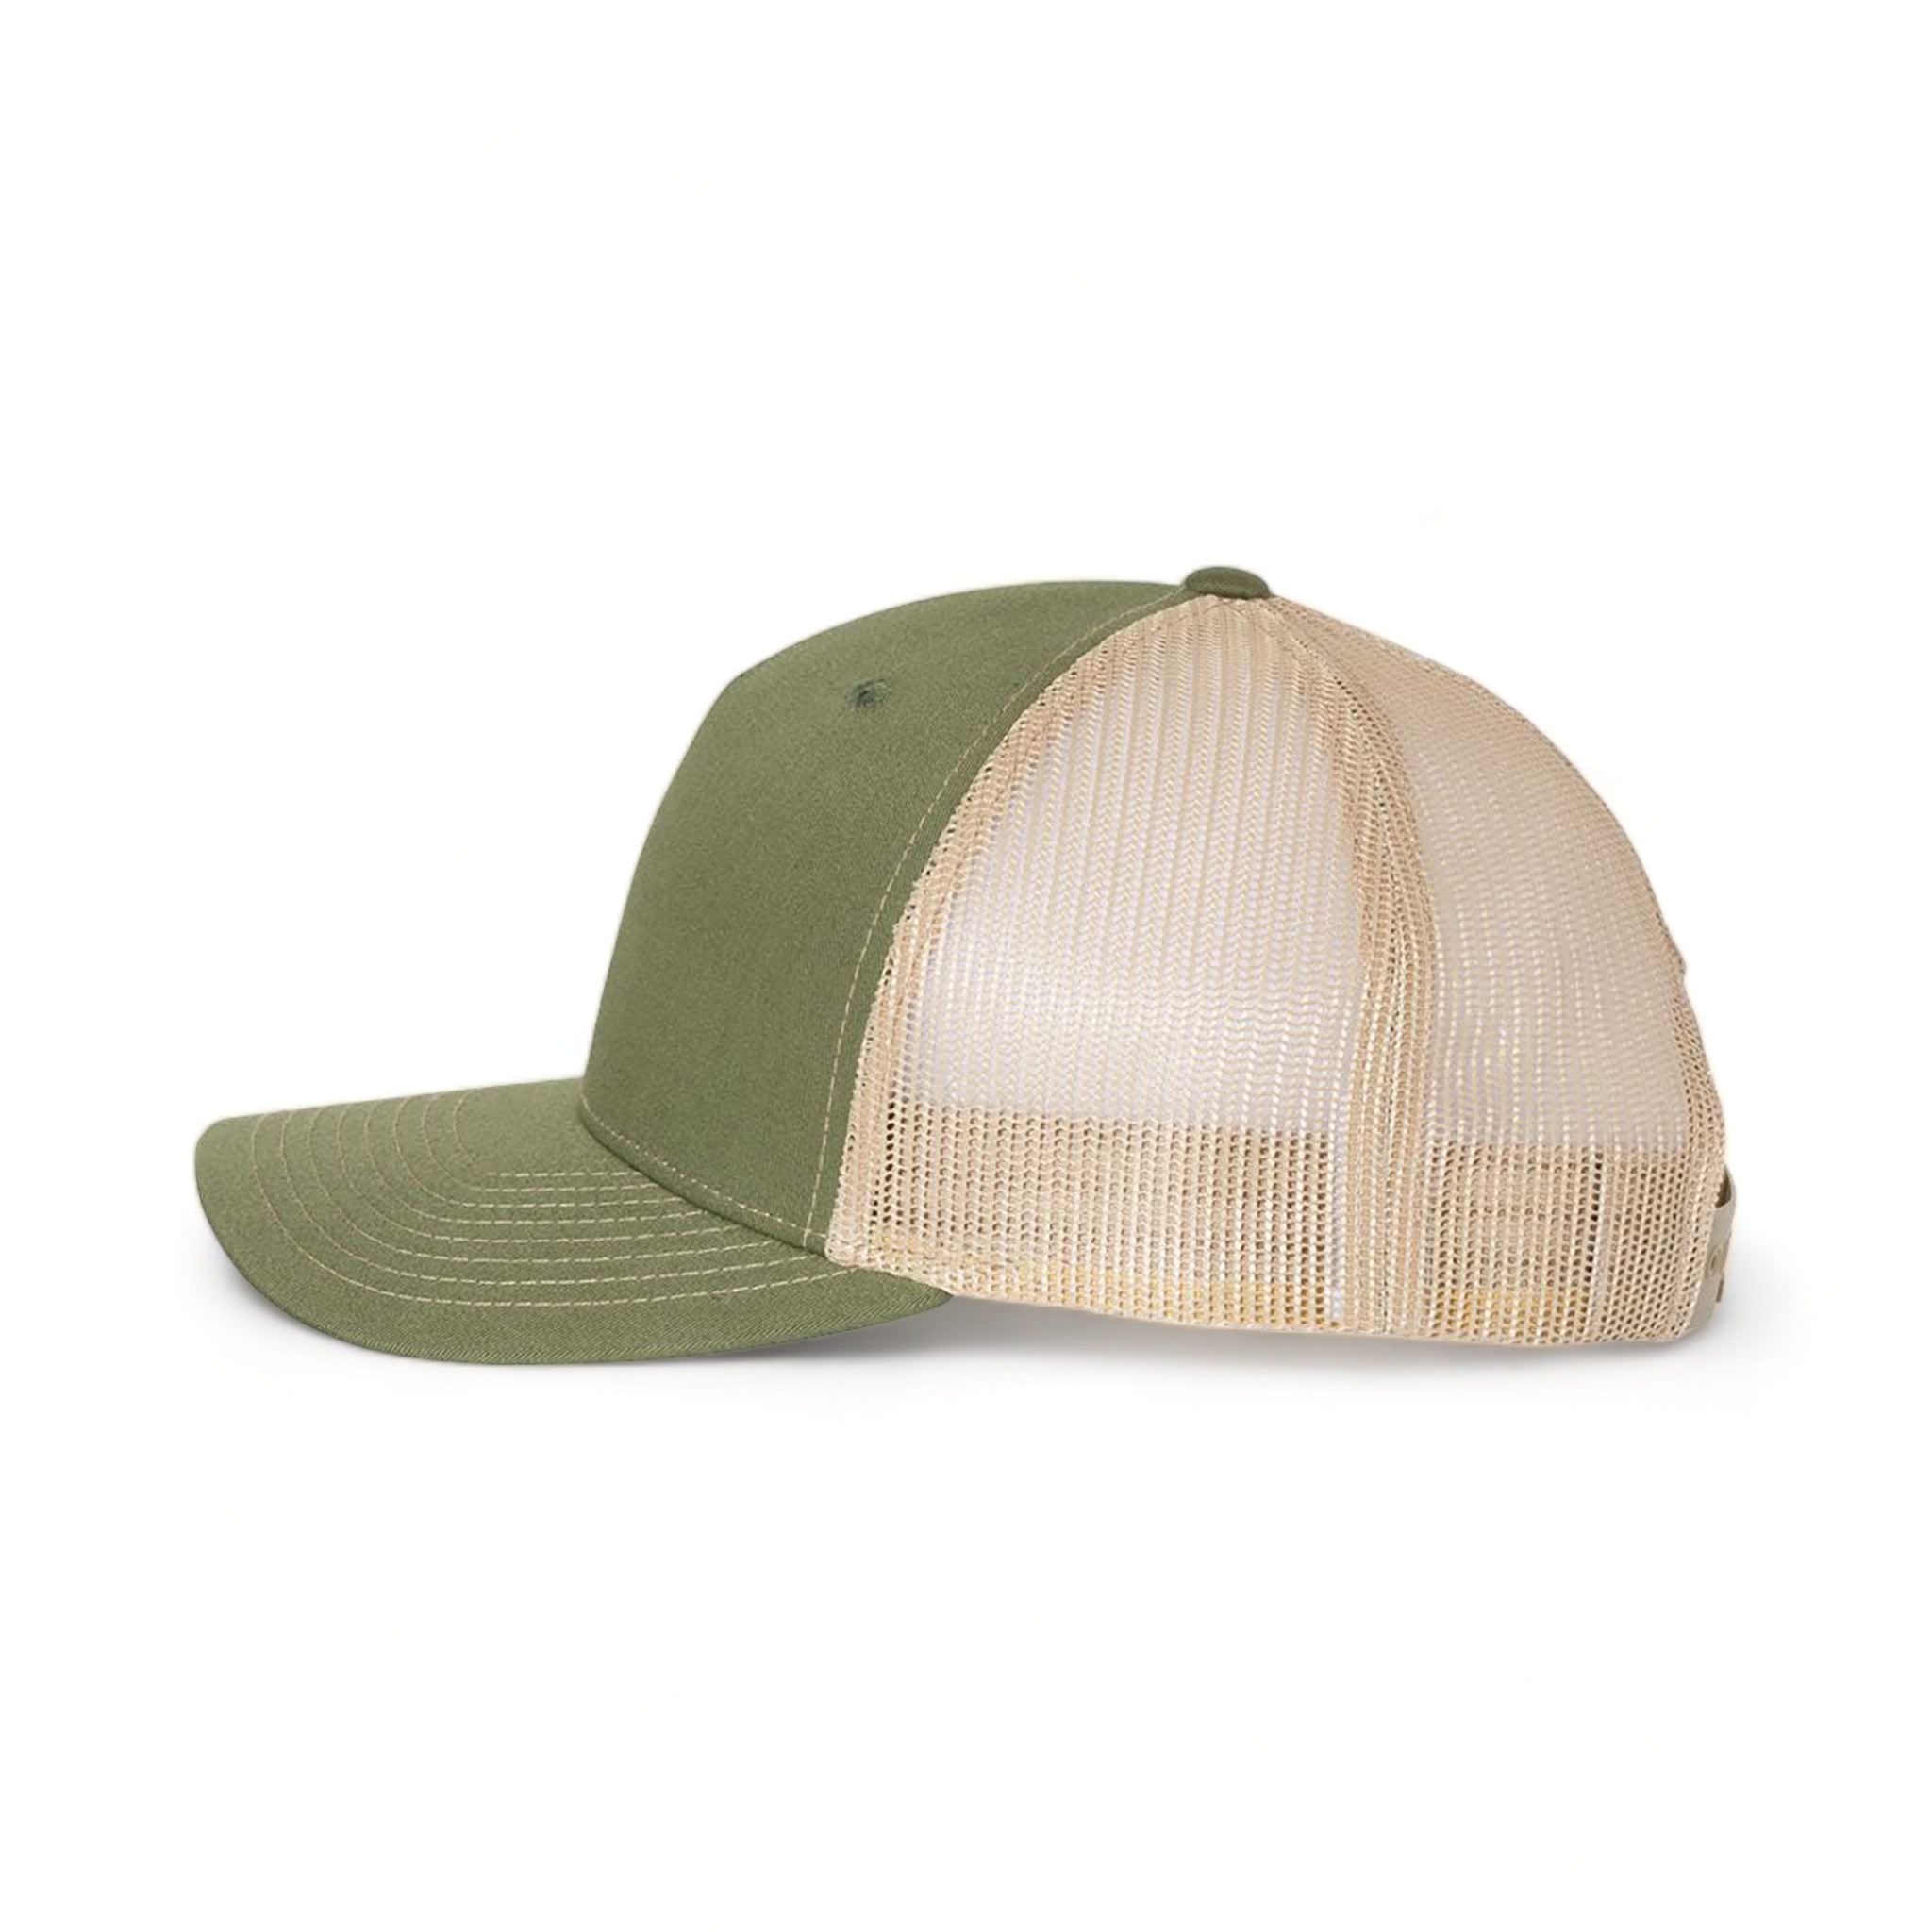 Side view of Richardson 112FP custom hat in army olive green and tan